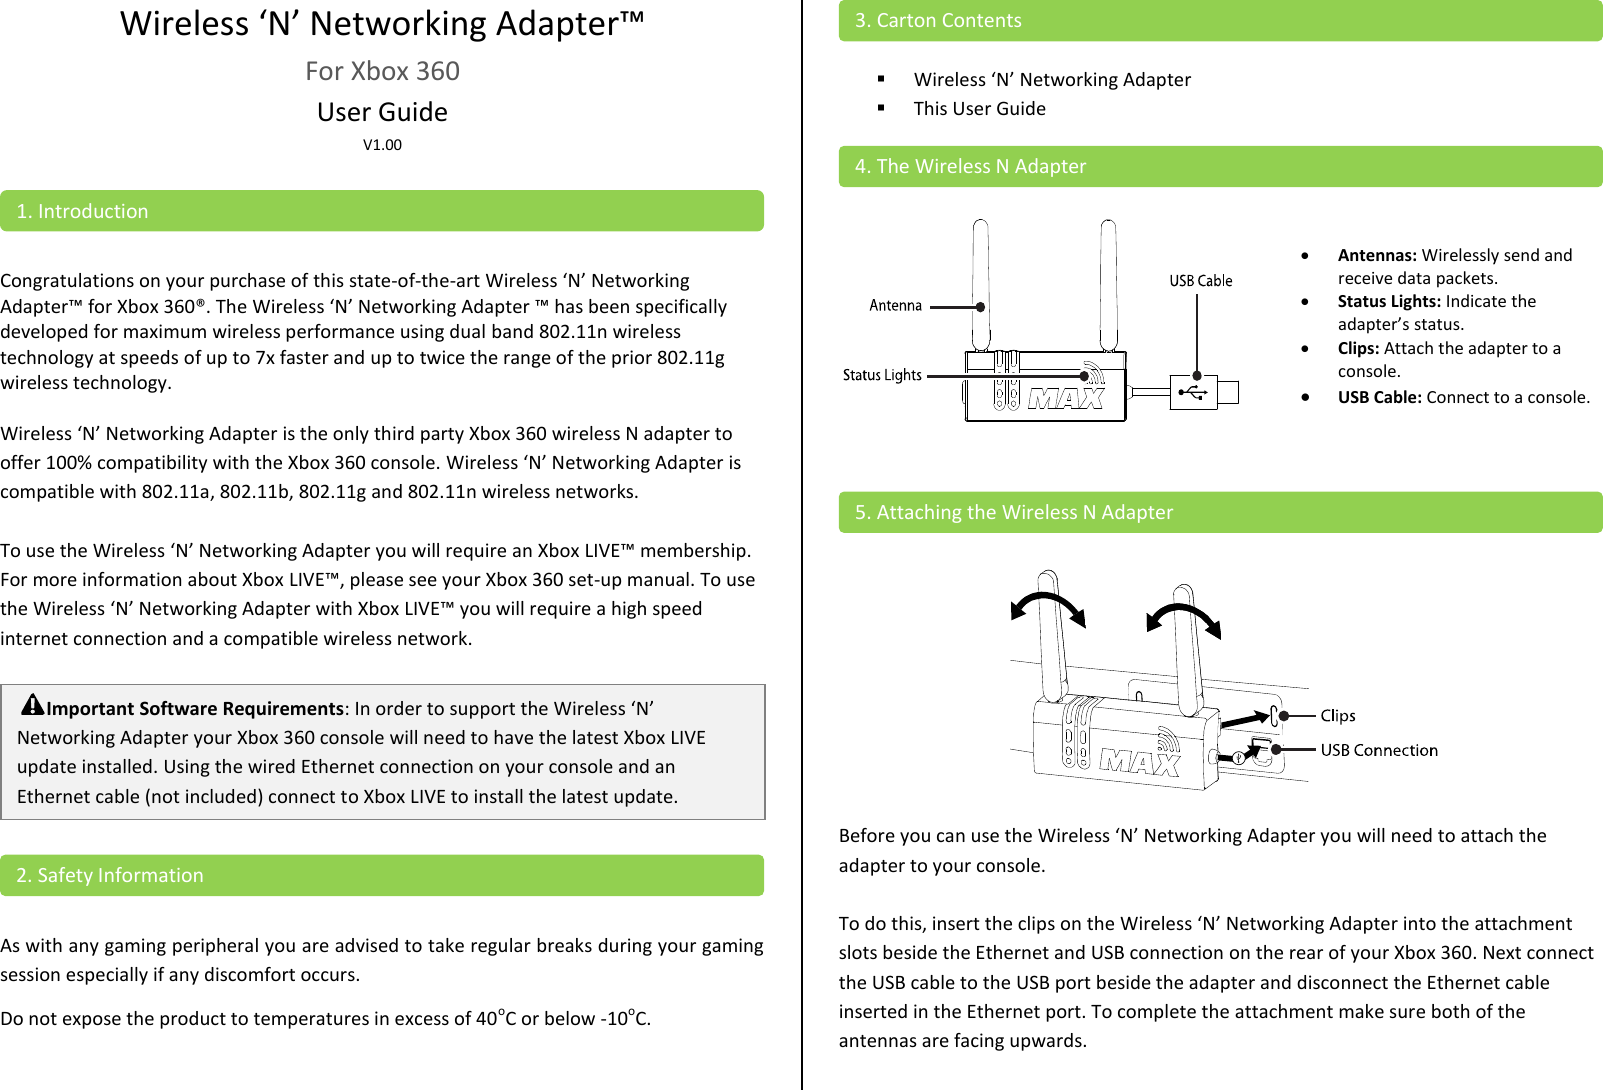 Wireless ‘N’ Networking Adapter™ For Xbox 360 User Guide V1.00    Congratulations on your purchase of this state-of-the-art Wireless ‘N’ Networking Adapter™ for Xbox 360®. The Wireless ‘N’ Networking Adapter ™ has been specifically developed for maximum wireless performance using dual band 802.11n wireless technology at speeds of up to 7x faster and up to twice the range of the prior 802.11g wireless technology.   Wireless ‘N’ Networking Adapter is the only third party Xbox 360 wireless N adapter to offer 100% compatibility with the Xbox 360 console. Wireless ‘N’ Networking Adapter is compatible with 802.11a, 802.11b, 802.11g and 802.11n wireless networks.  To use the Wireless ‘N’ Networking Adapter you will require an Xbox LIVE™ membership. For more information about Xbox LIVE™, please see your Xbox 360 set-up manual. To use the Wireless ‘N’ Networking Adapter with Xbox LIVE™ you will require a high speed internet connection and a compatible wireless network.      As with any gaming peripheral you are advised to take regular breaks during your gaming session especially if any discomfort occurs. Do not expose the product to temperatures in excess of 40oC or below -10oC.    Wireless ‘N’ Networking Adapter   This User Guide       Antennas: Wirelessly send and receive data packets.  Status Lights: Indicate the adapter’s status.  Clips: Attach the adapter to a console.  USB Cable: Connect to a console.      Before you can use the Wireless ‘N’ Networking Adapter you will need to attach the adapter to your console.   To do this, insert the clips on the Wireless ‘N’ Networking Adapter into the attachment slots beside the Ethernet and USB connection on the rear of your Xbox 360. Next connect the USB cable to the USB port beside the adapter and disconnect the Ethernet cable inserted in the Ethernet port. To complete the attachment make sure both of the antennas are facing upwards.  5. Attaching the Wireless N Adapter 4. The Wireless N Adapter 3. Carton Contents 2. Safety Information Important Software Requirements: In order to support the Wireless ‘N’ Networking Adapter your Xbox 360 console will need to have the latest Xbox LIVE update installed. Using the wired Ethernet connection on your console and an Ethernet cable (not included) connect to Xbox LIVE to install the latest update.   1. Introduction 